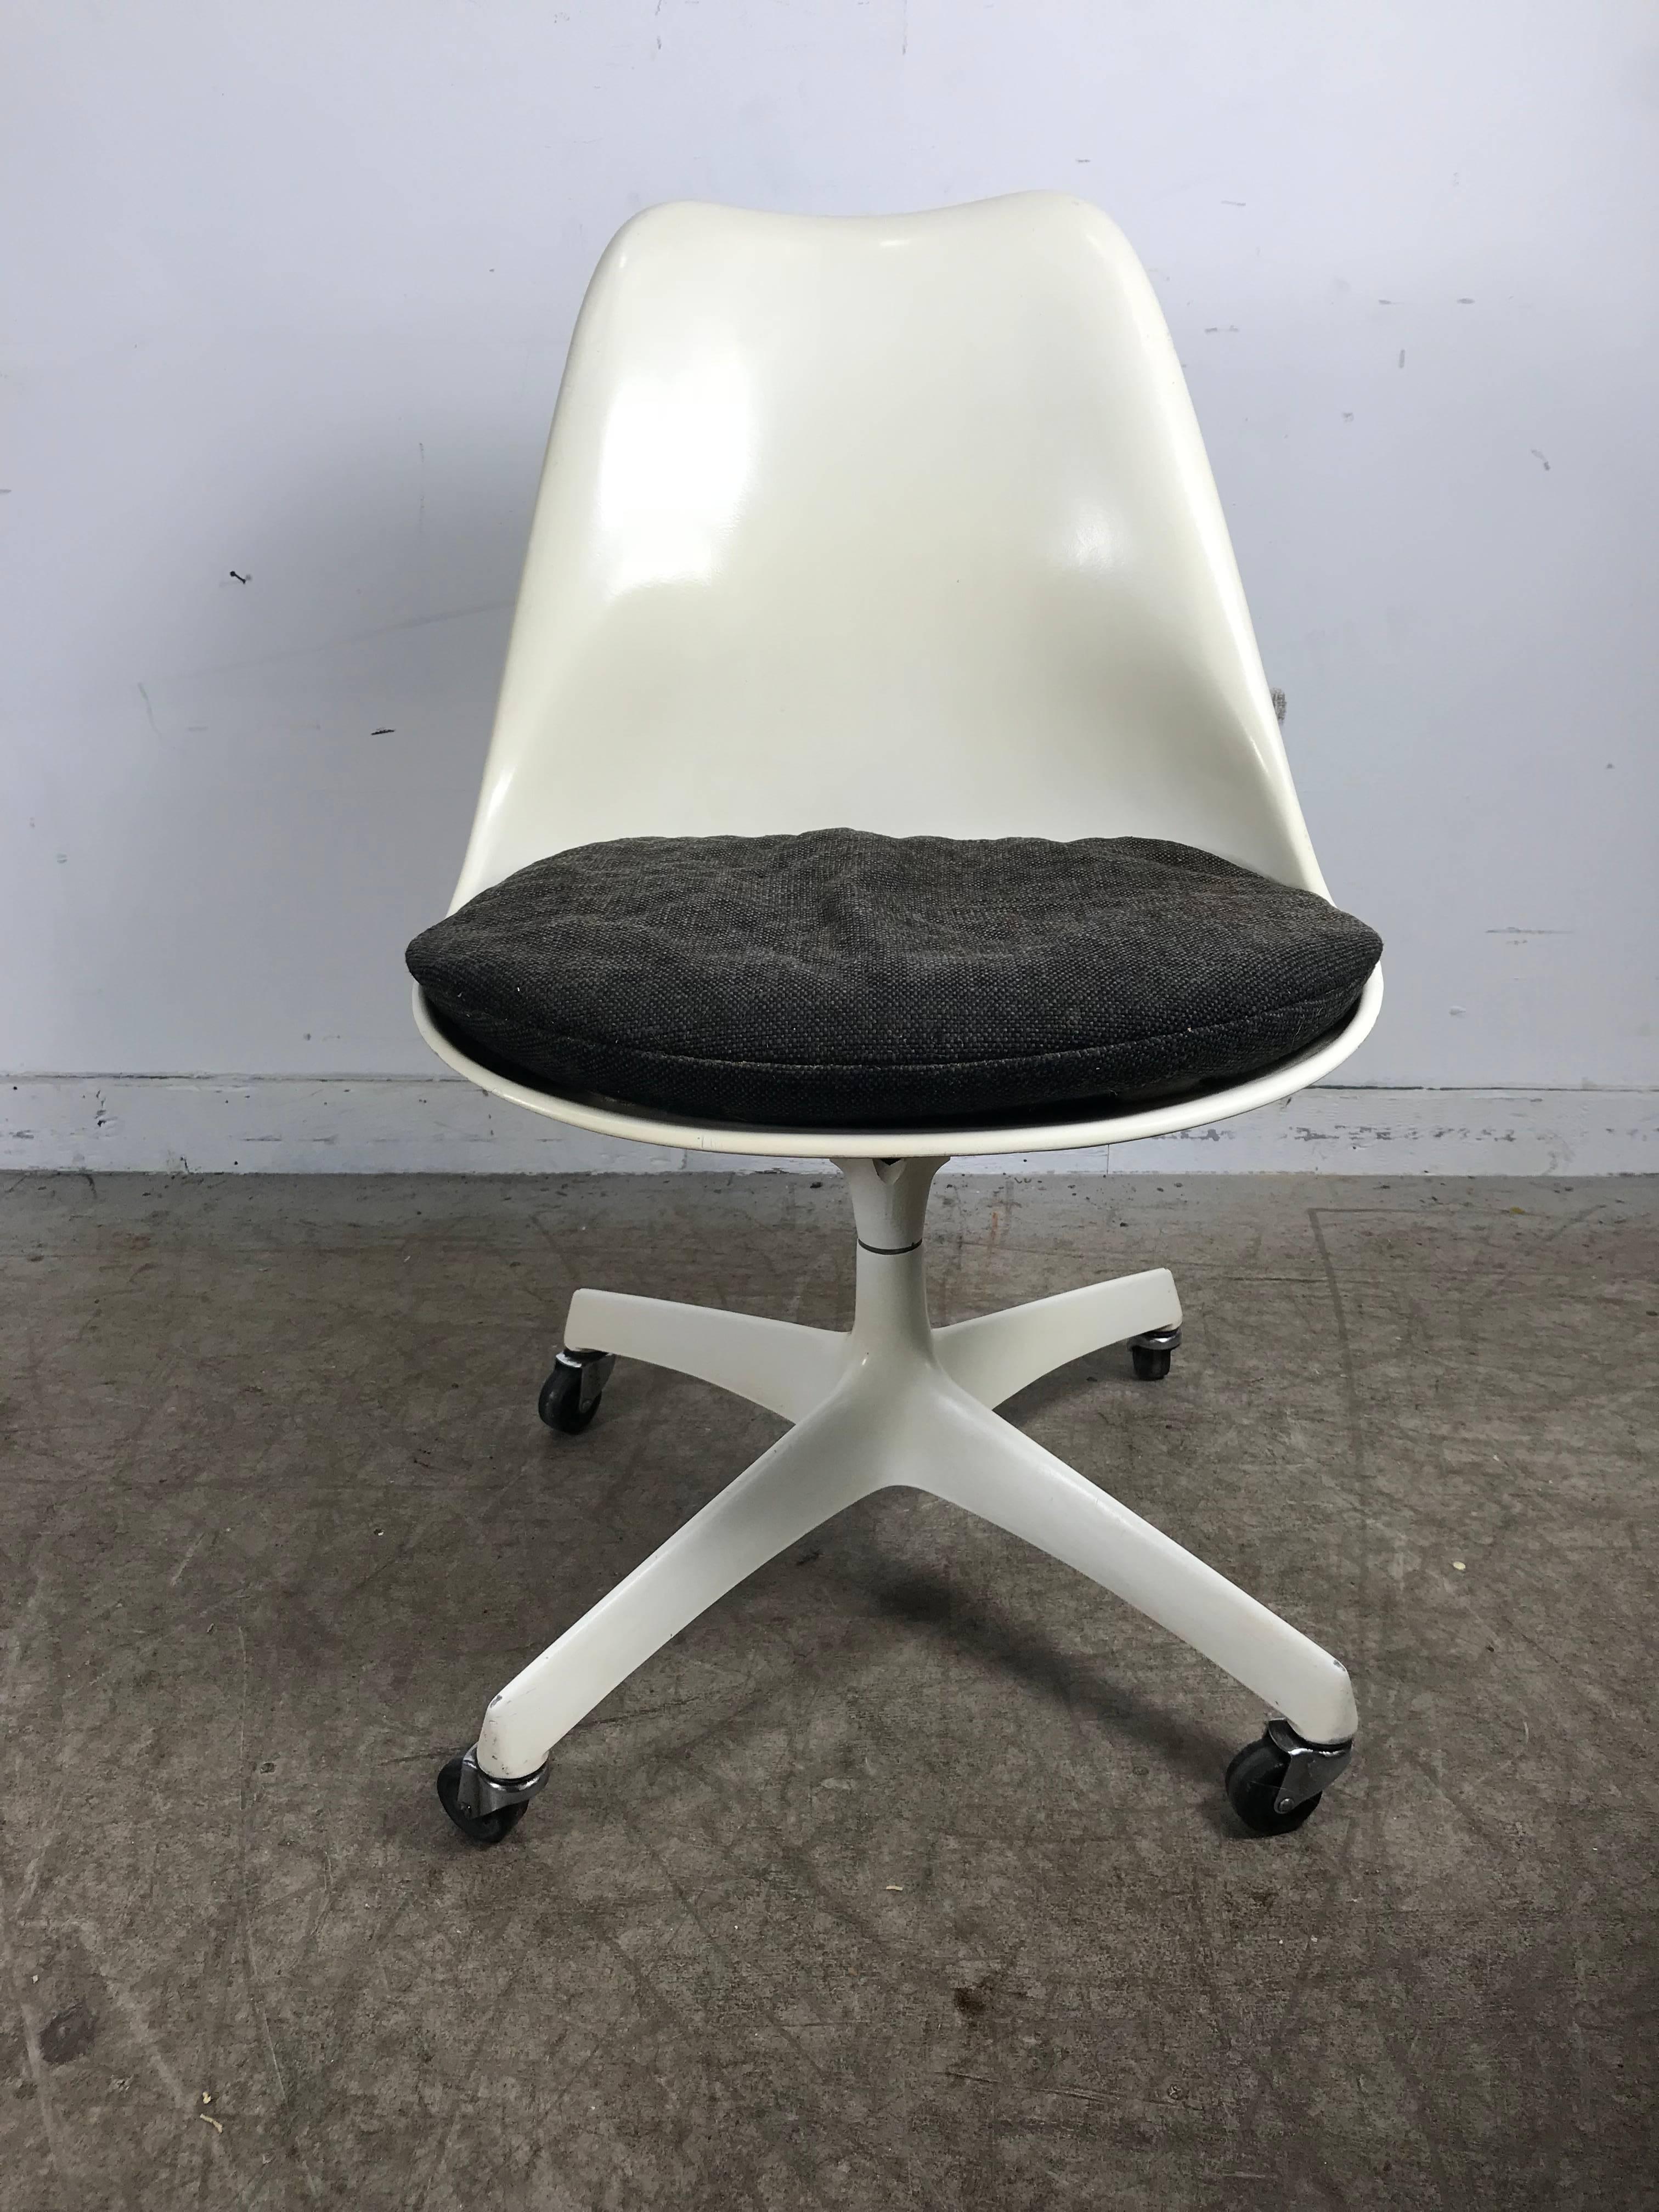 Important early Knoll tilt swivel tulip top task chair, Eero Saarinen. I believe this chair was only in production for one year. Produced in very limited quantity. Stylized cast steel four star base. Tilt swivel mechanism. Classic tulip chair top.